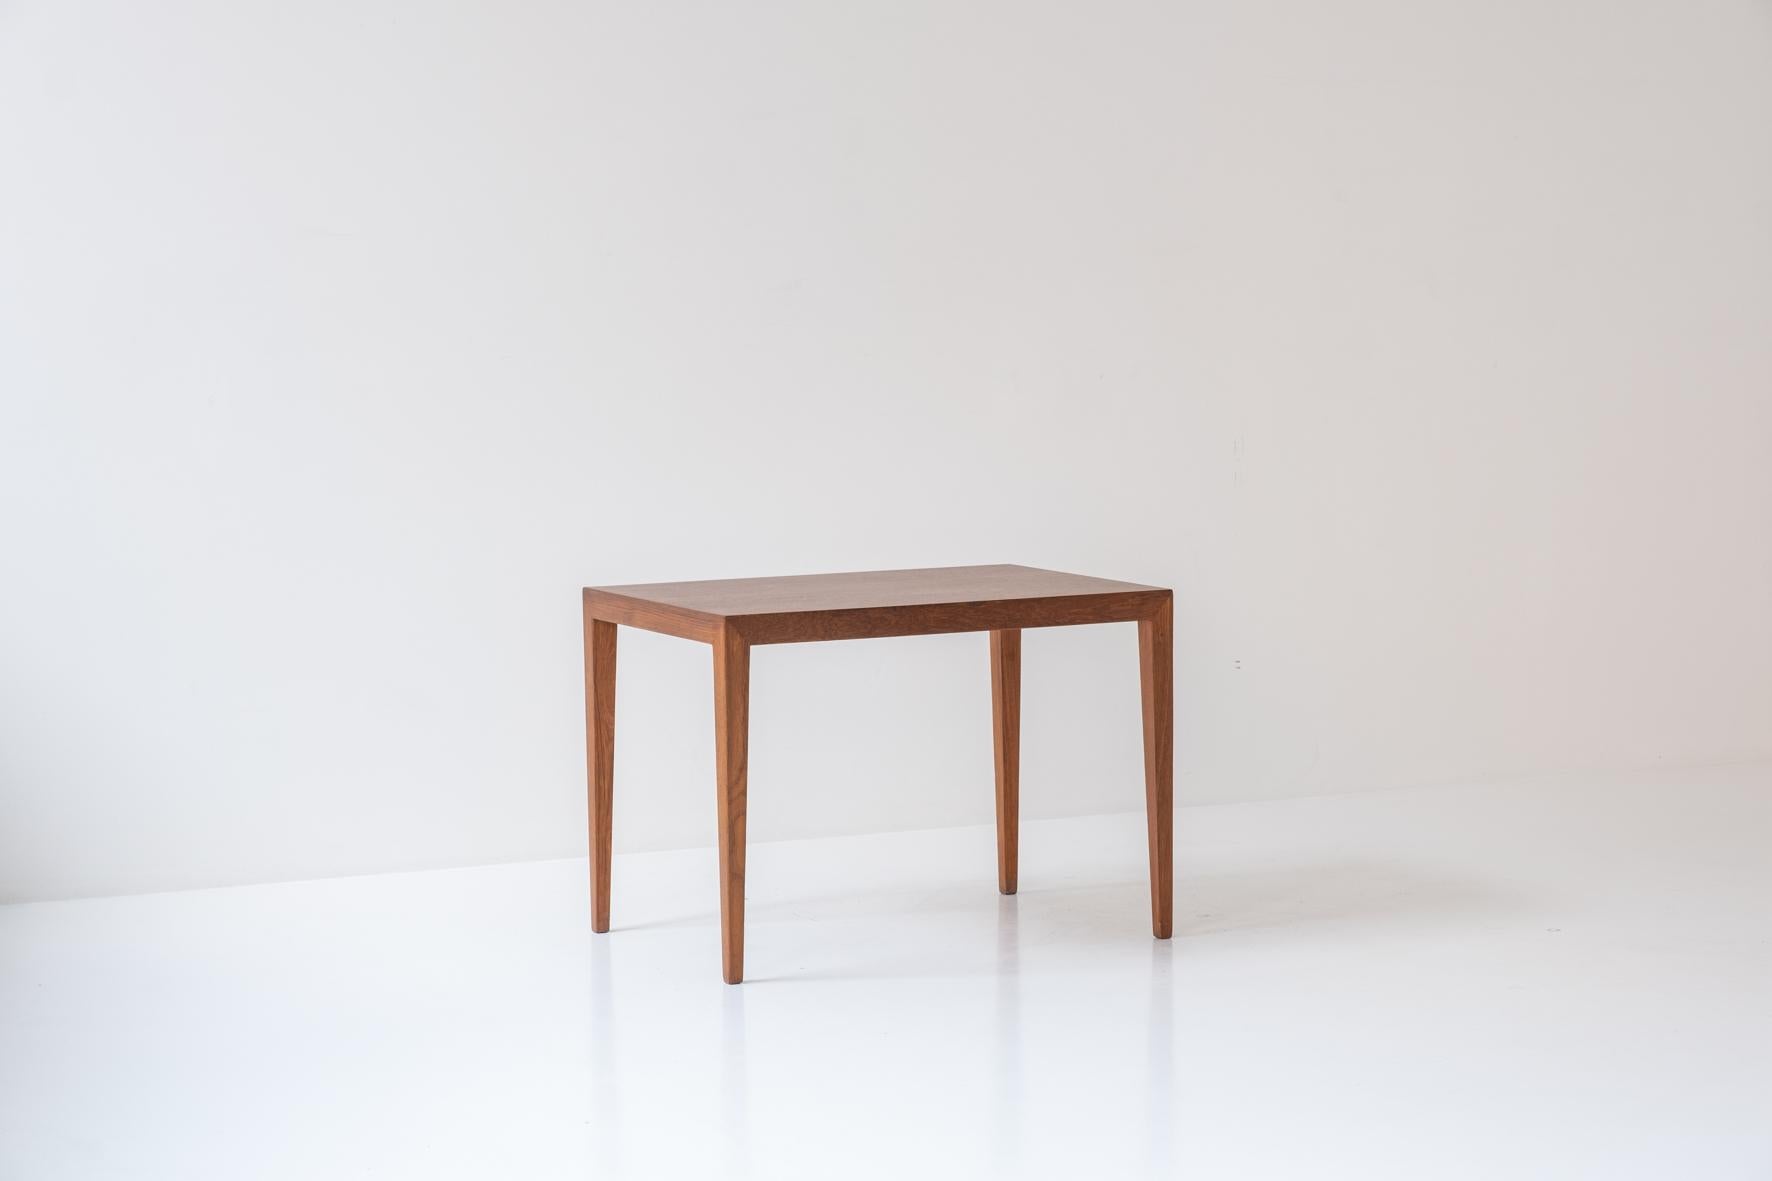 Elegant side table by Severin Hansen for Haslev Møbelfabrik, Denmark 1950’s. This side table is made out of teak and remains in a well presented condition. Great example of high-end Scandinavian craftsmanship. Labeled underneath.

Measurements
H 50